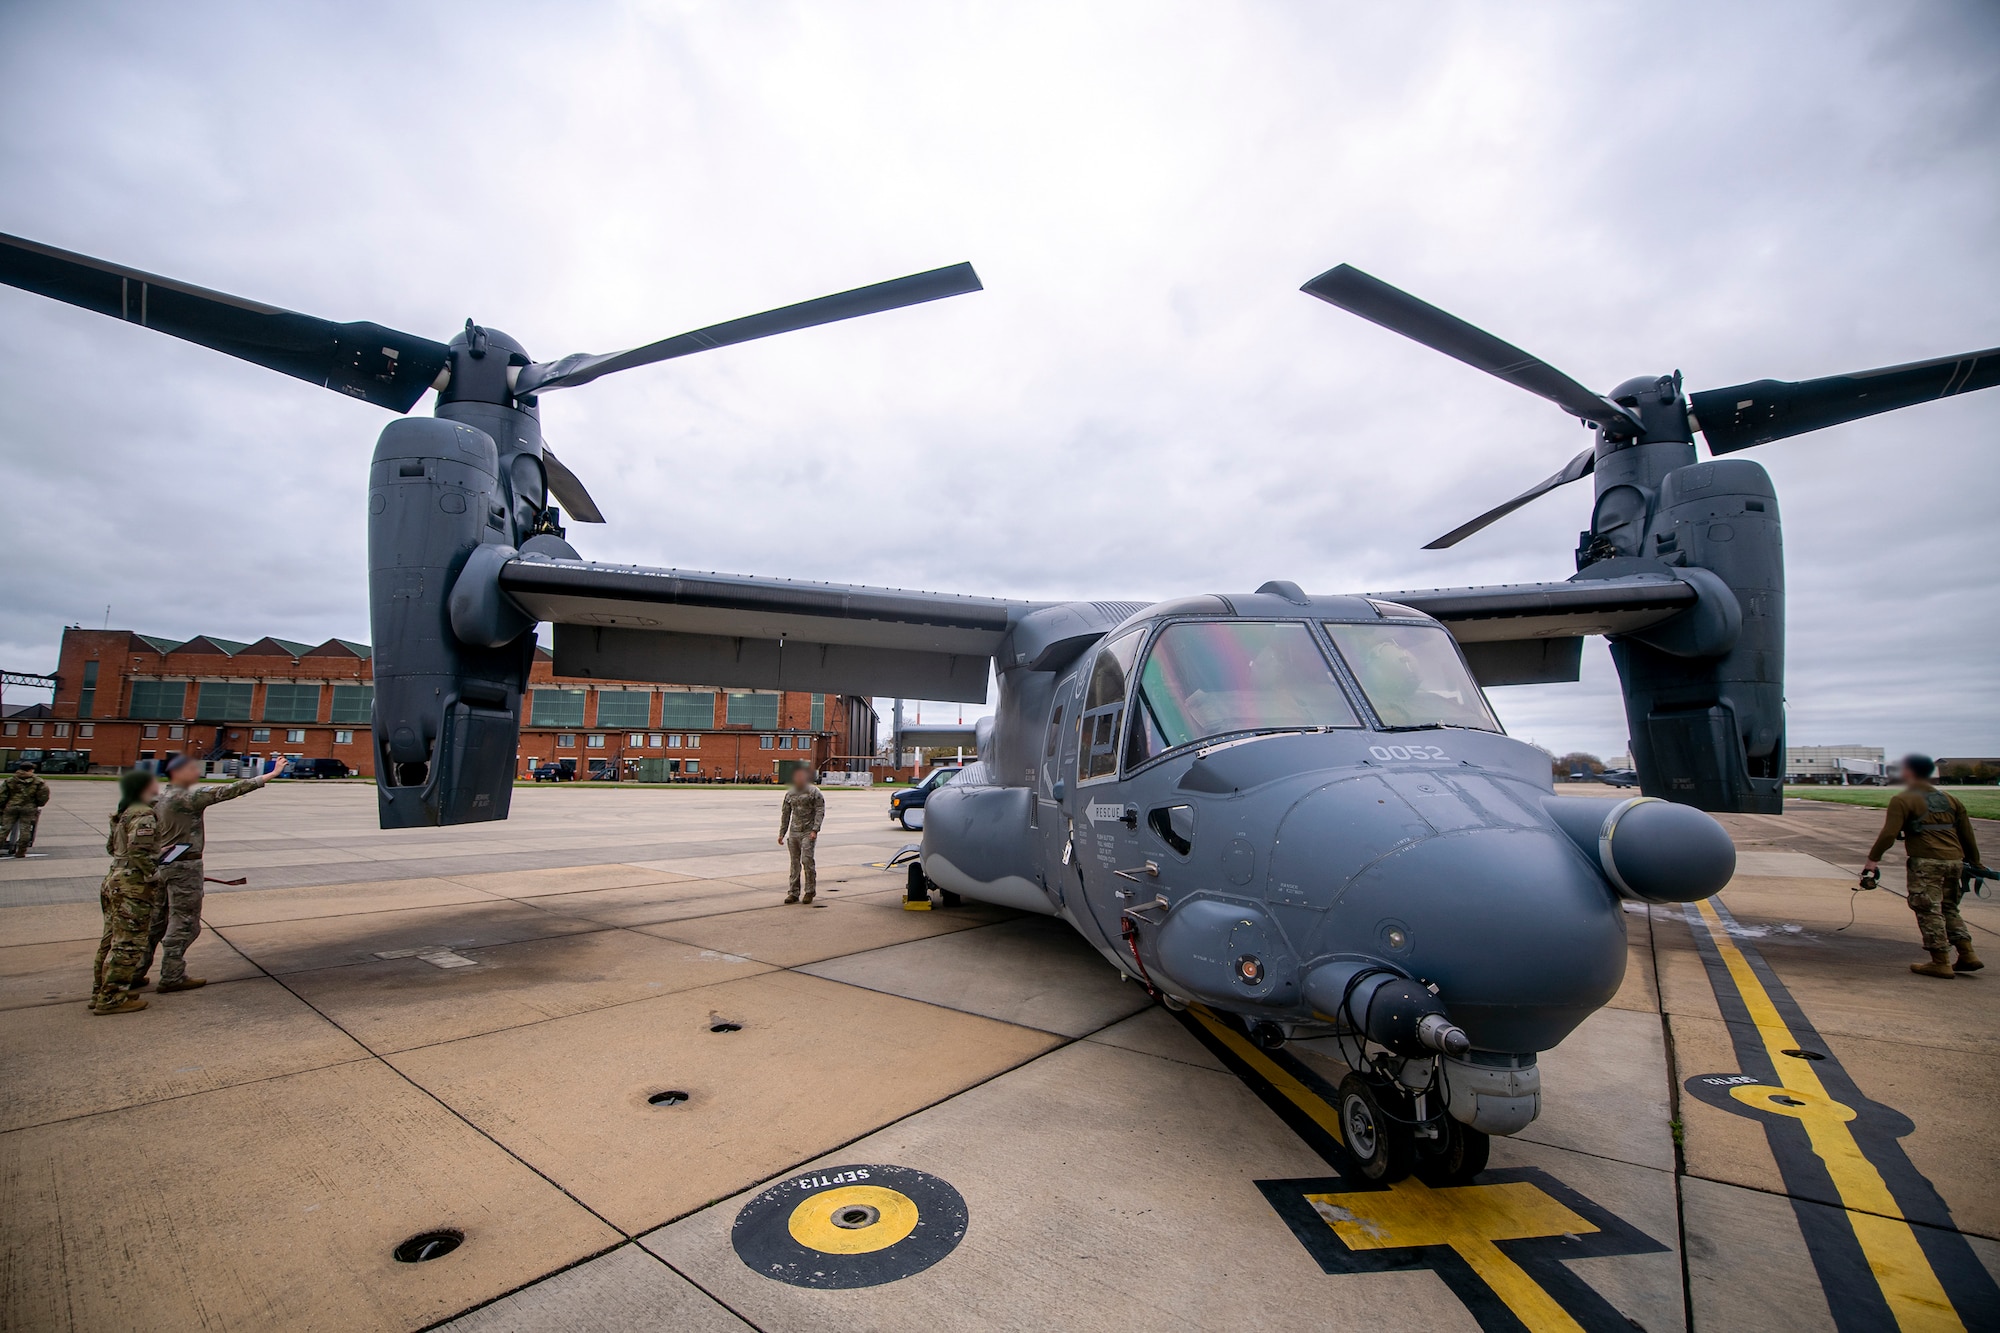 Airmen from the 352d Special Operations Wing inspect a CV-22B Osprey at RAF Mildenhall, England, Nov. 11, 2022. The 352d SOW were preparing to conduct a flyover for the annual Veterans Day ceremony at Cambridge American Cemetery and Memorial. (U.S. Air Force photo by Staff Sgt. Eugene Oliver)